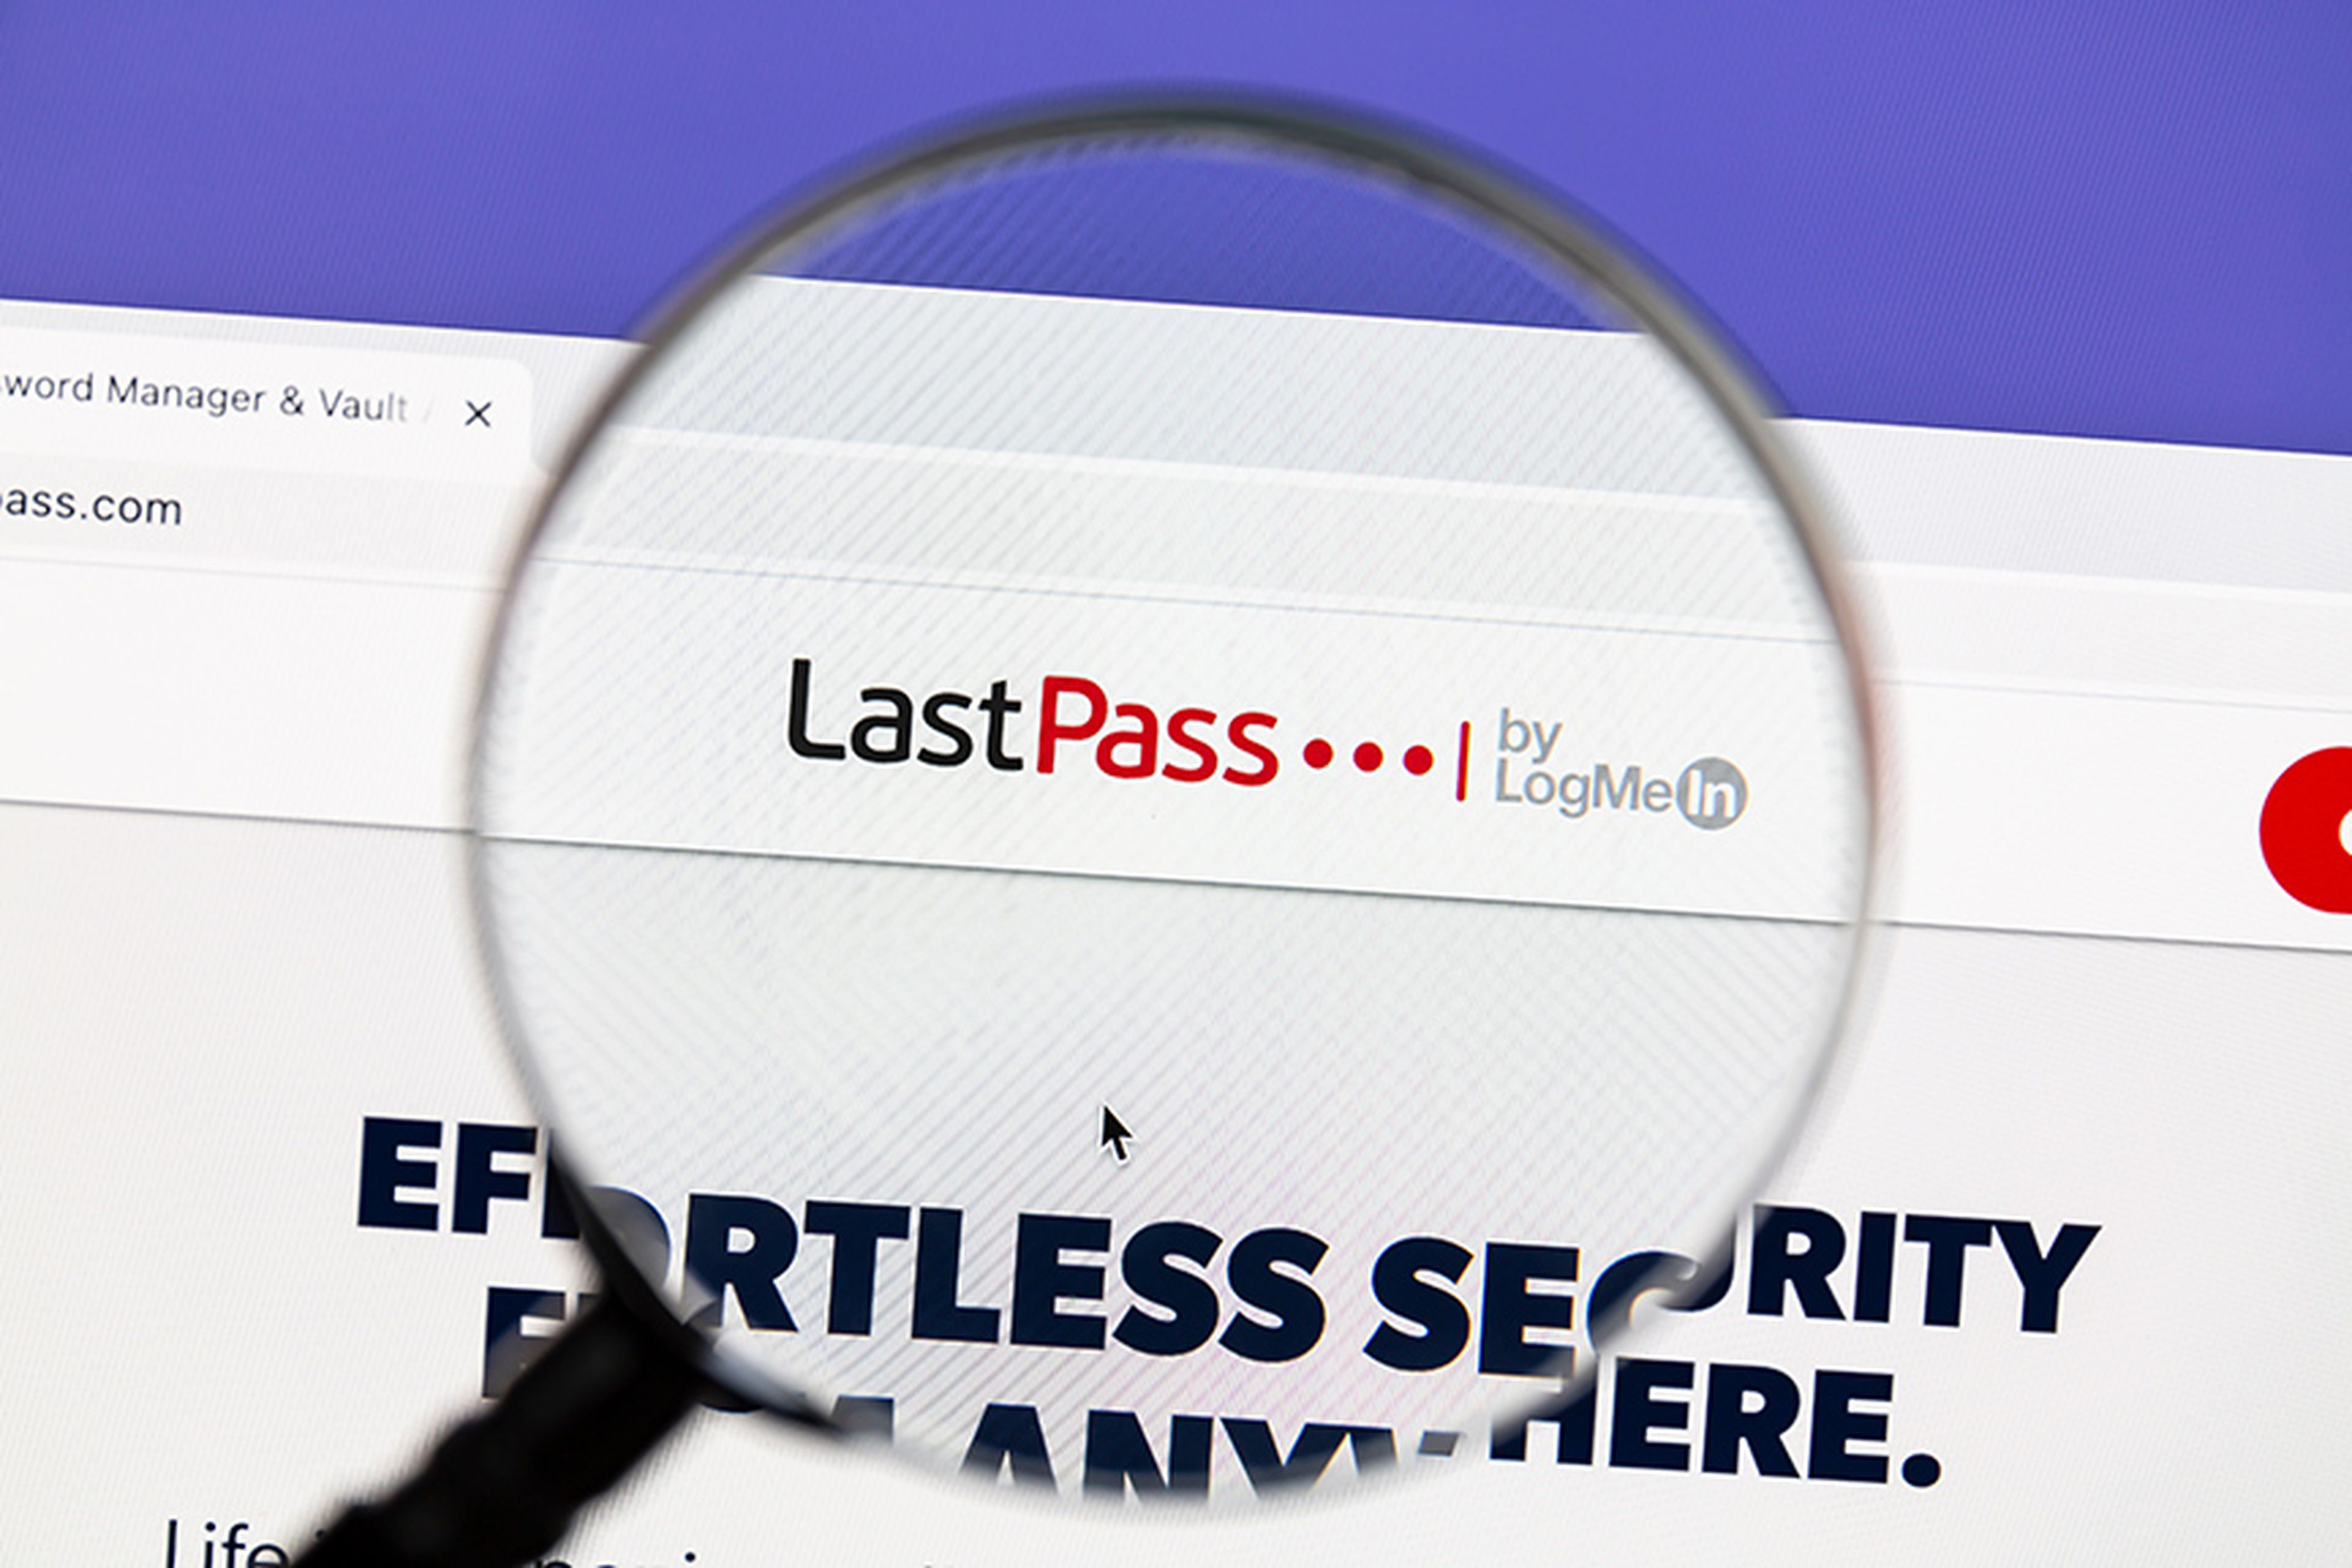 LastPass website under a magnifying glass. LastPass is a freemium password manager that stores encrypted passwords online.